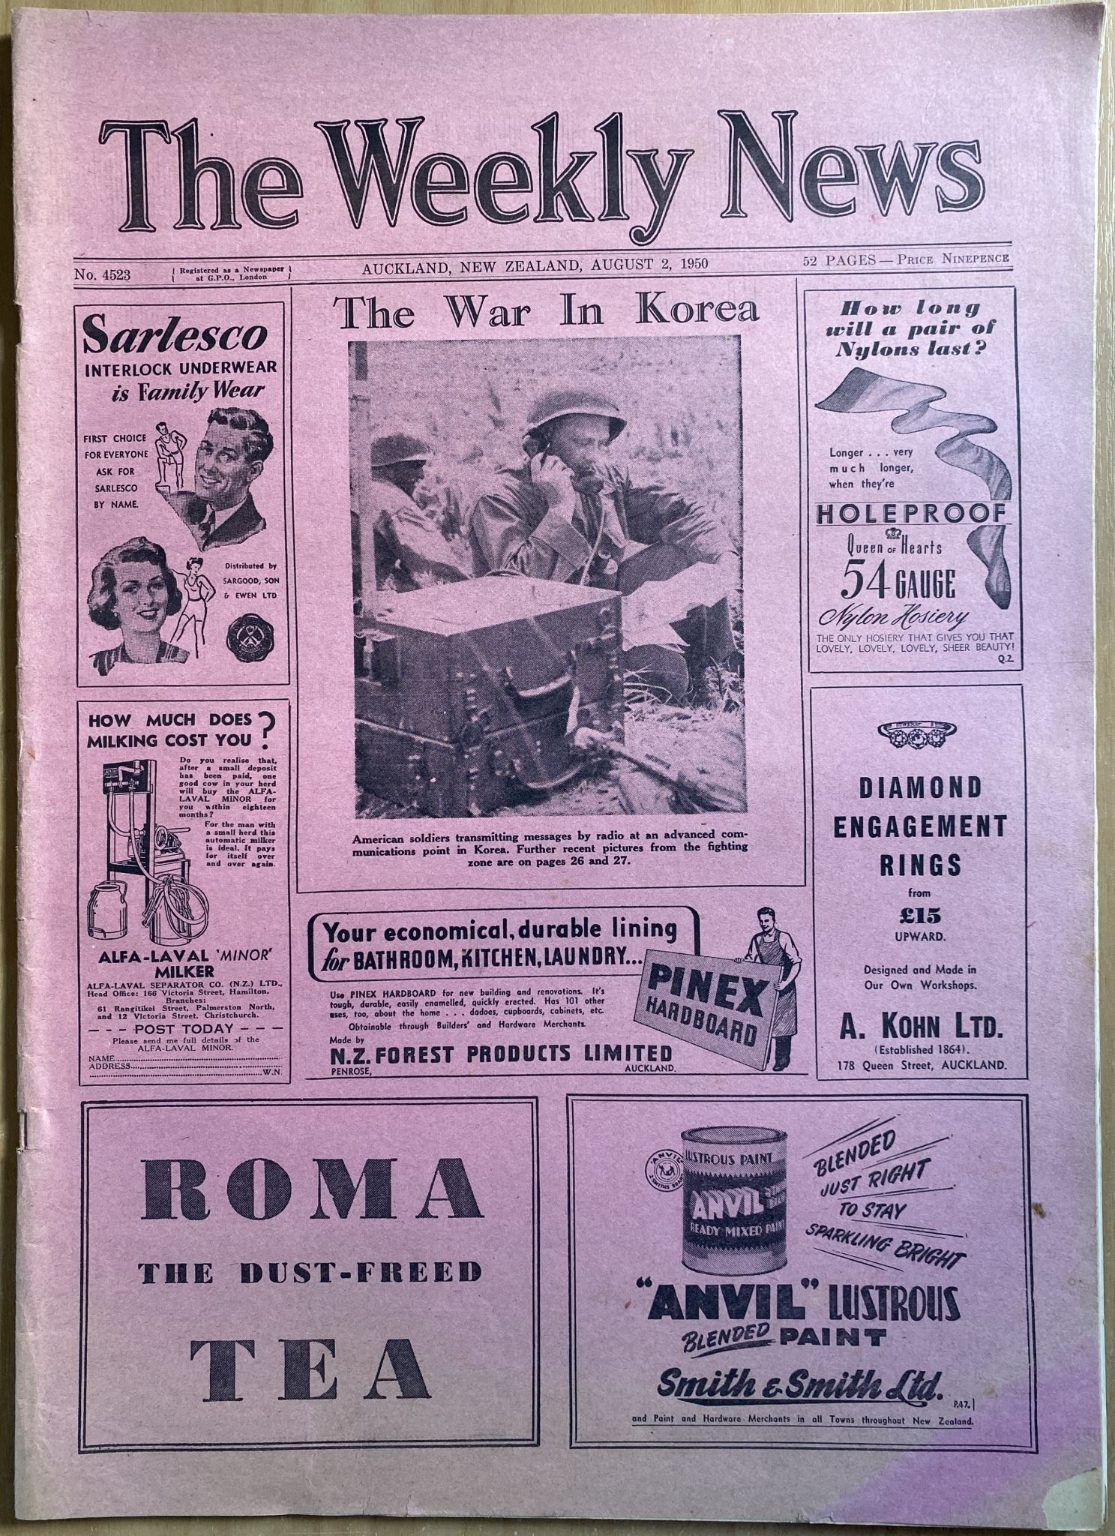 OLD NEWSPAPER: The Weekly News, No. 4523, 2 August 1950